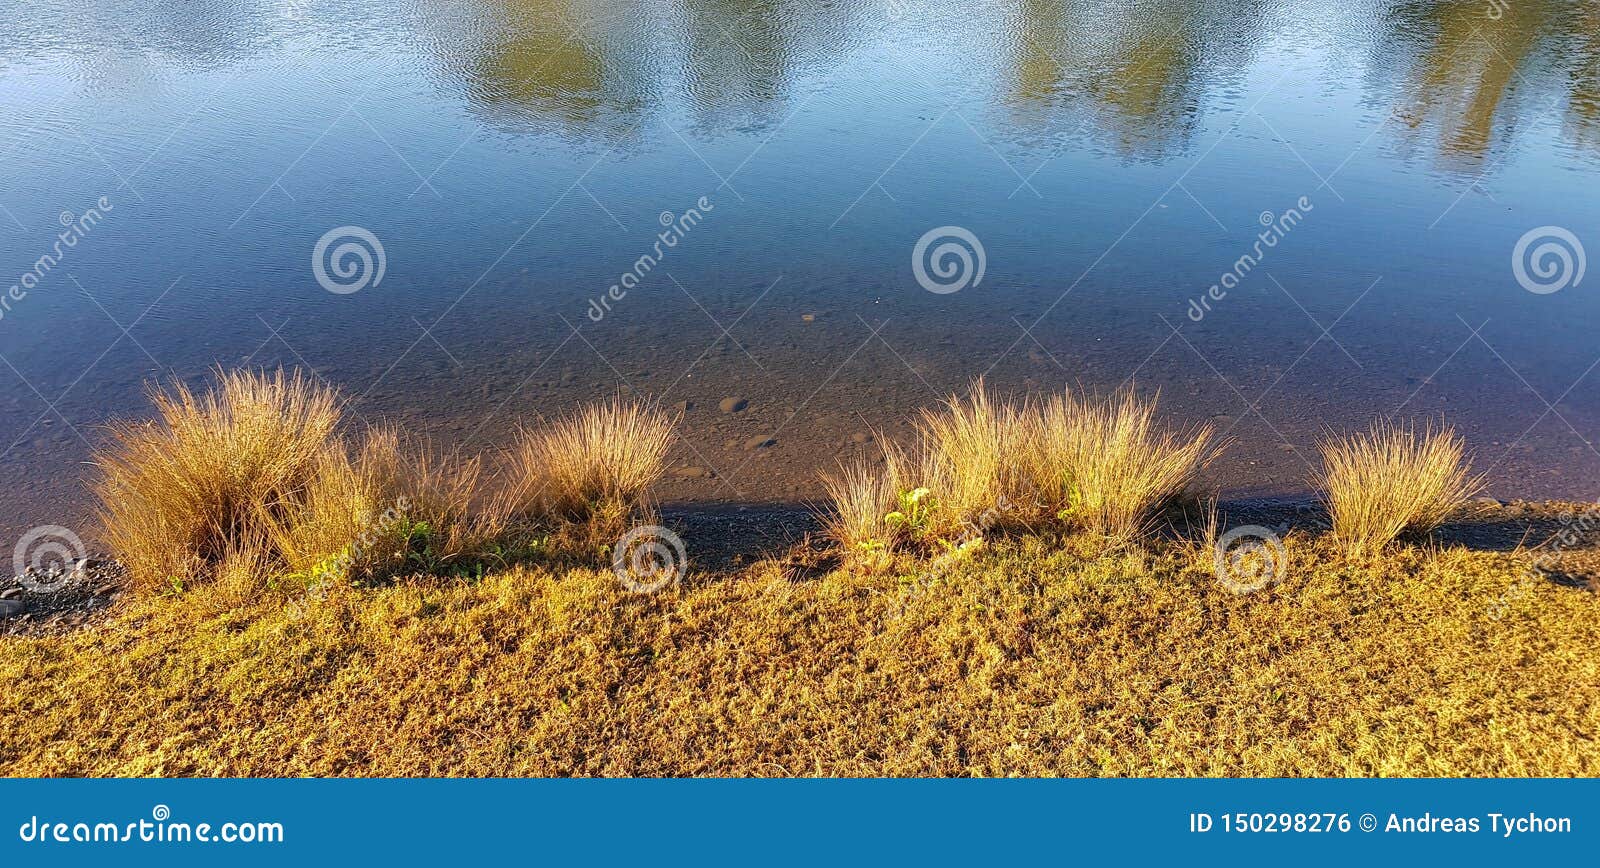 Riverbank with Reeds and Grassy Shoreline Stock Photo - Image of ...